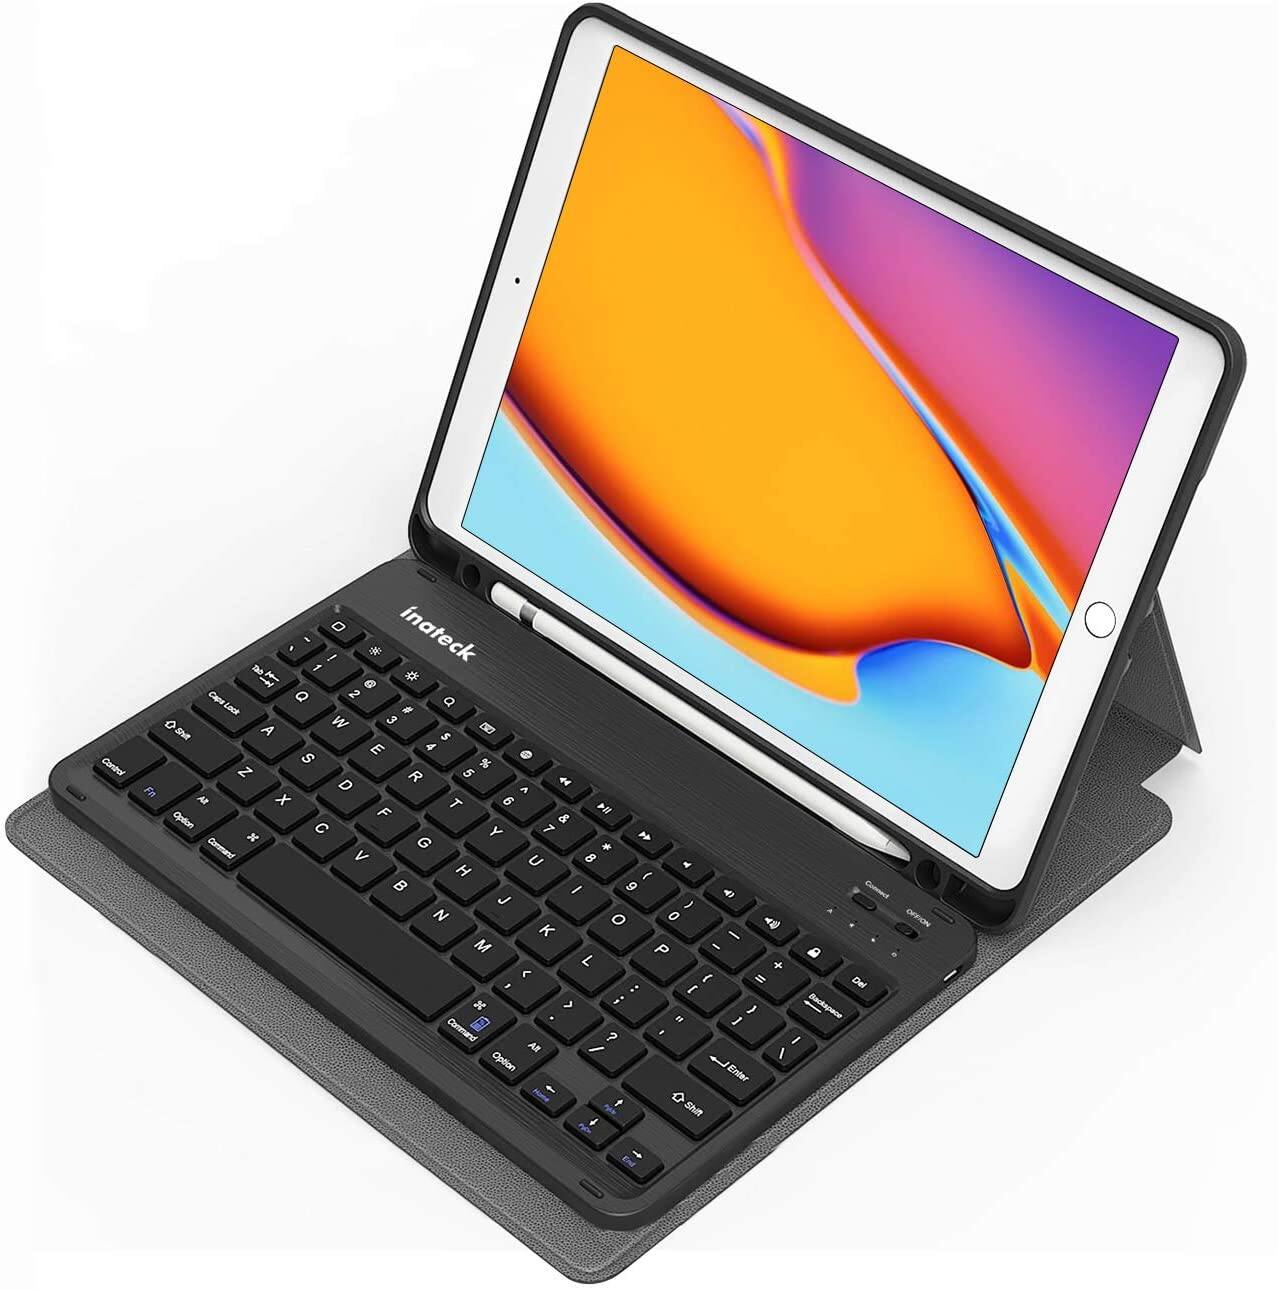 Inateck Keyboard Case for iPad 10.2/10.5 inch - Detachable - $19.99, 50% Off